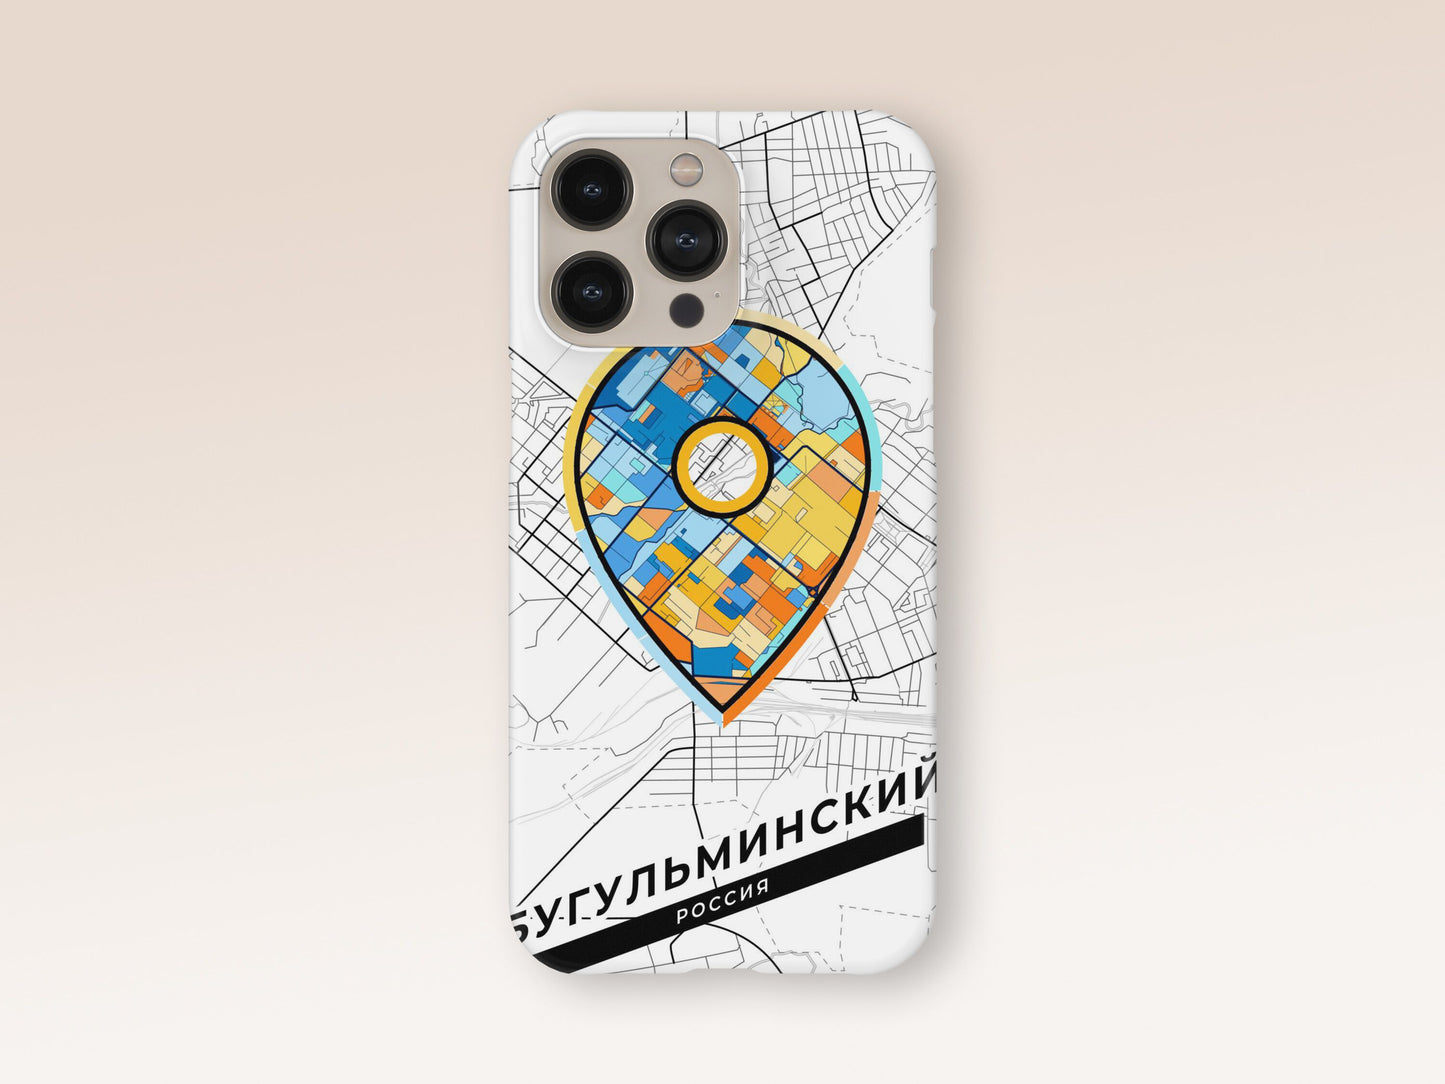 Bugulma Russia slim phone case with colorful icon. Birthday, wedding or housewarming gift. Couple match cases. 1